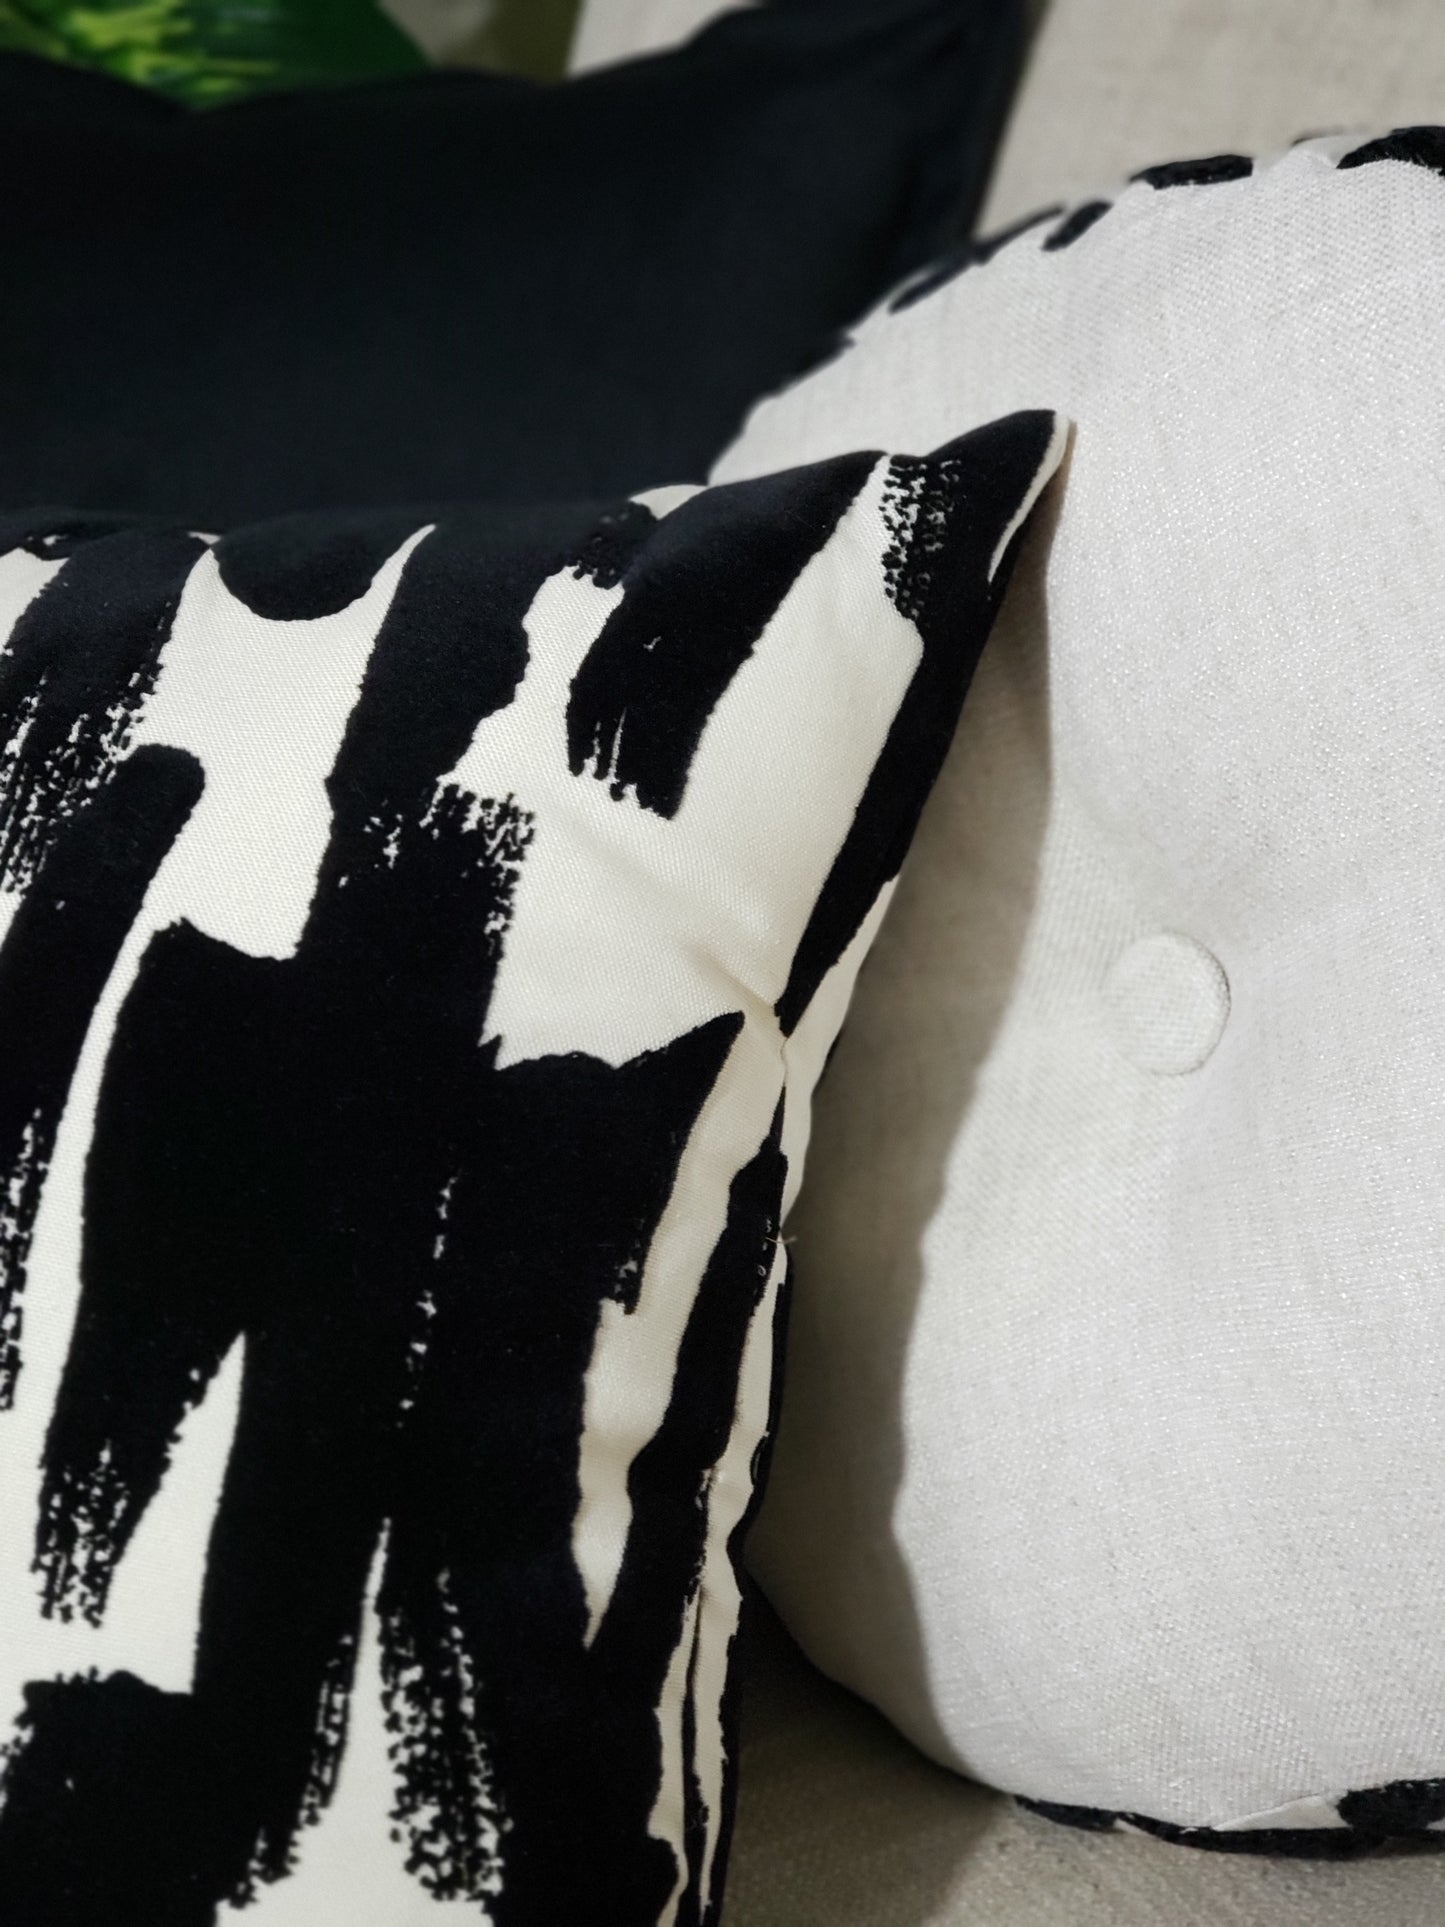 Janaya Opulent Strokes Black and White Designer Decorative Pillow Covers.Elevate your home decor with the Janaya Opulent Strokes Black and White Designer Decorative Pillow Covers. Handmade with designer textured velvet fabric, these covers boast bold black brush strokes for a timeless touch. Make a statement in any room with these daring covers.